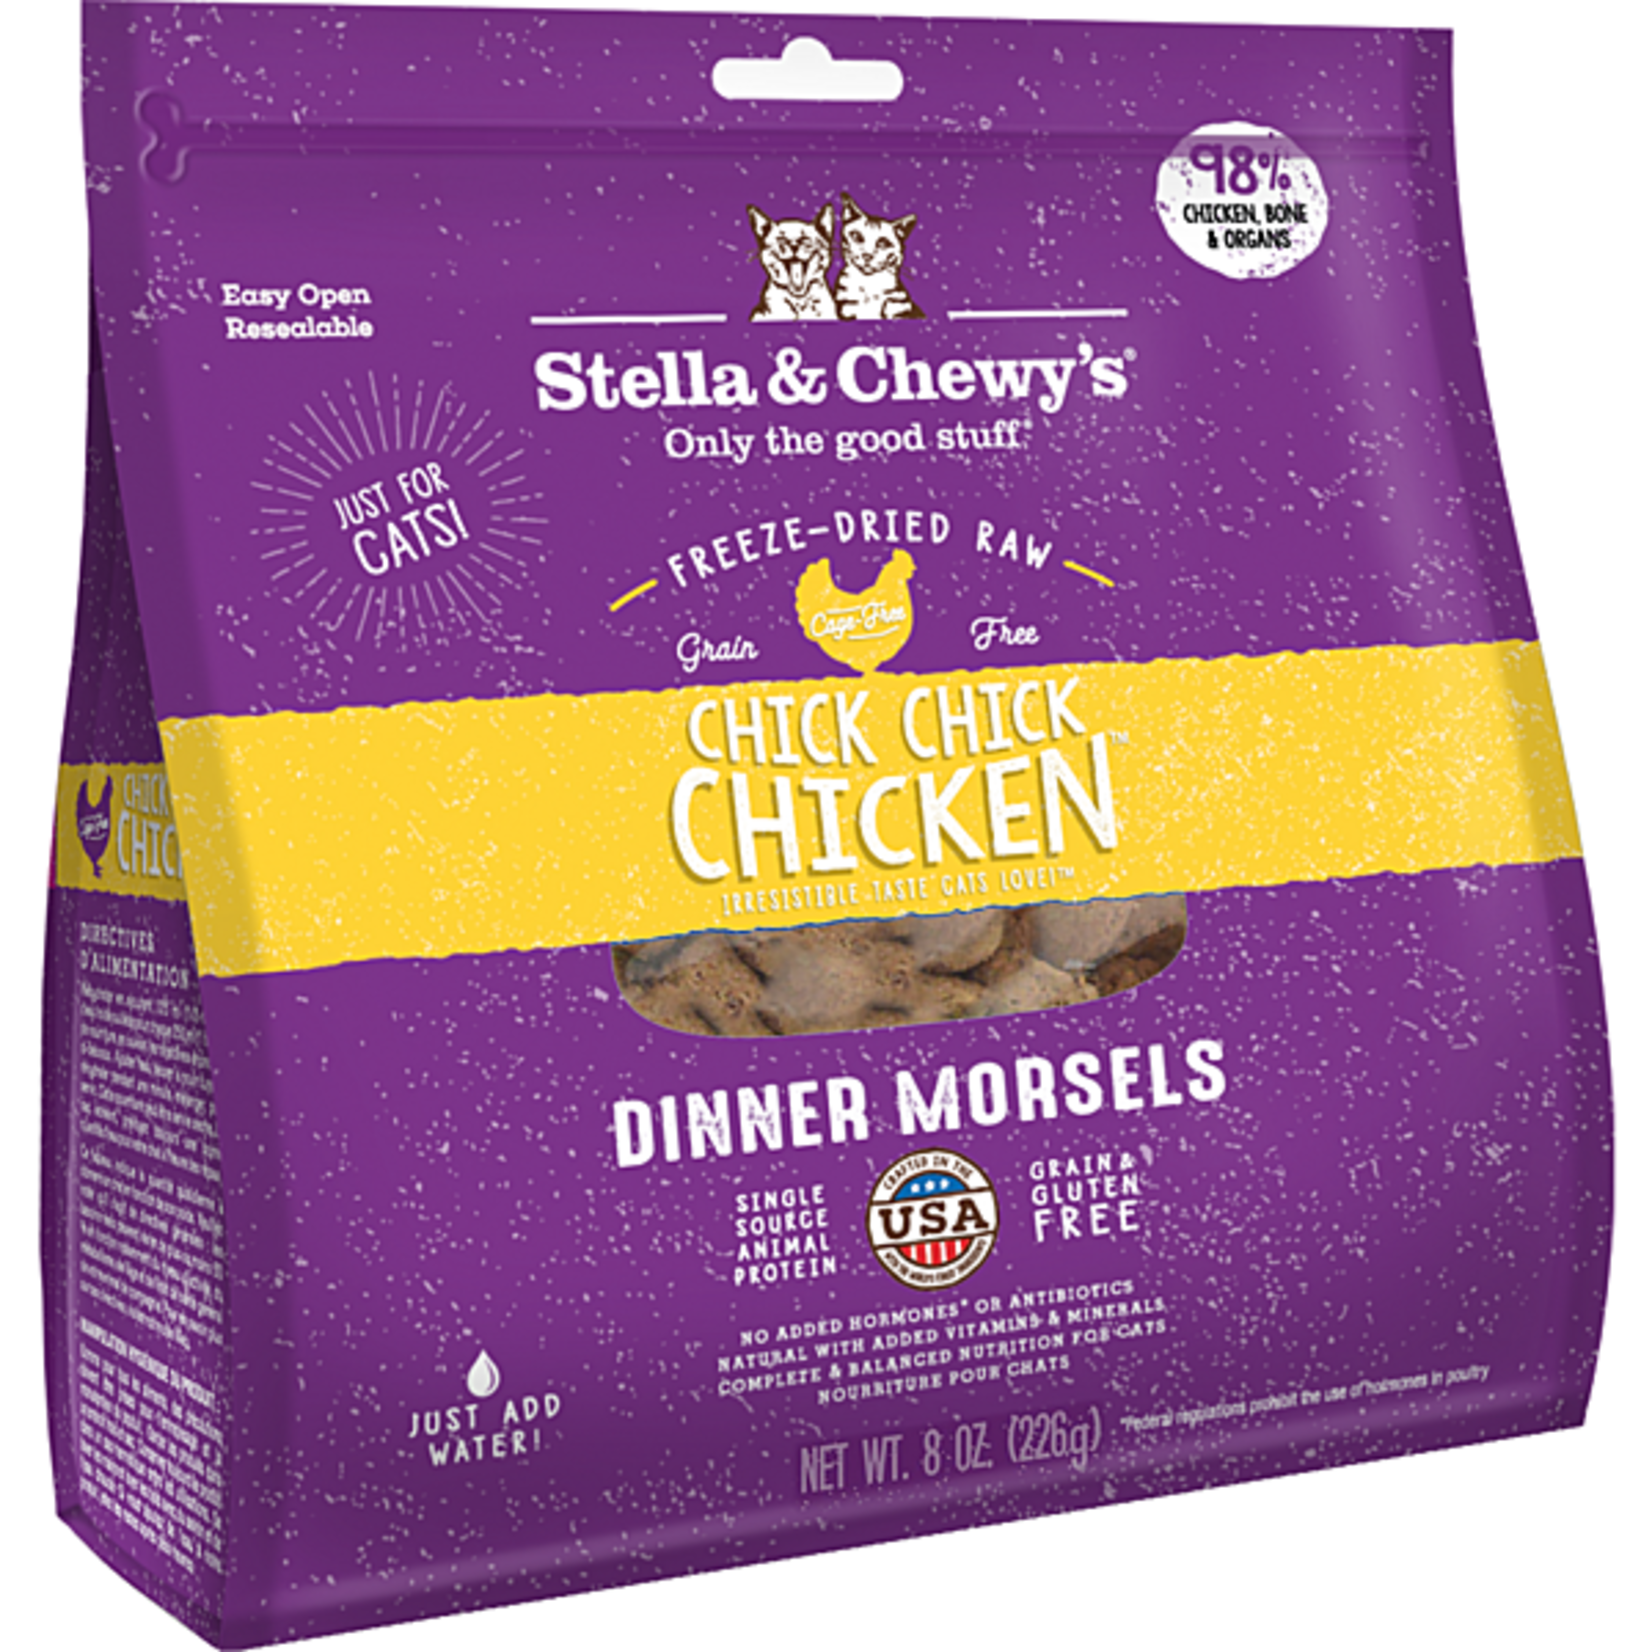 Stella & Chewy's Stella & Chewy's freeze dried dinner morsels Chick Chick Chicken 8 oz ( cats )